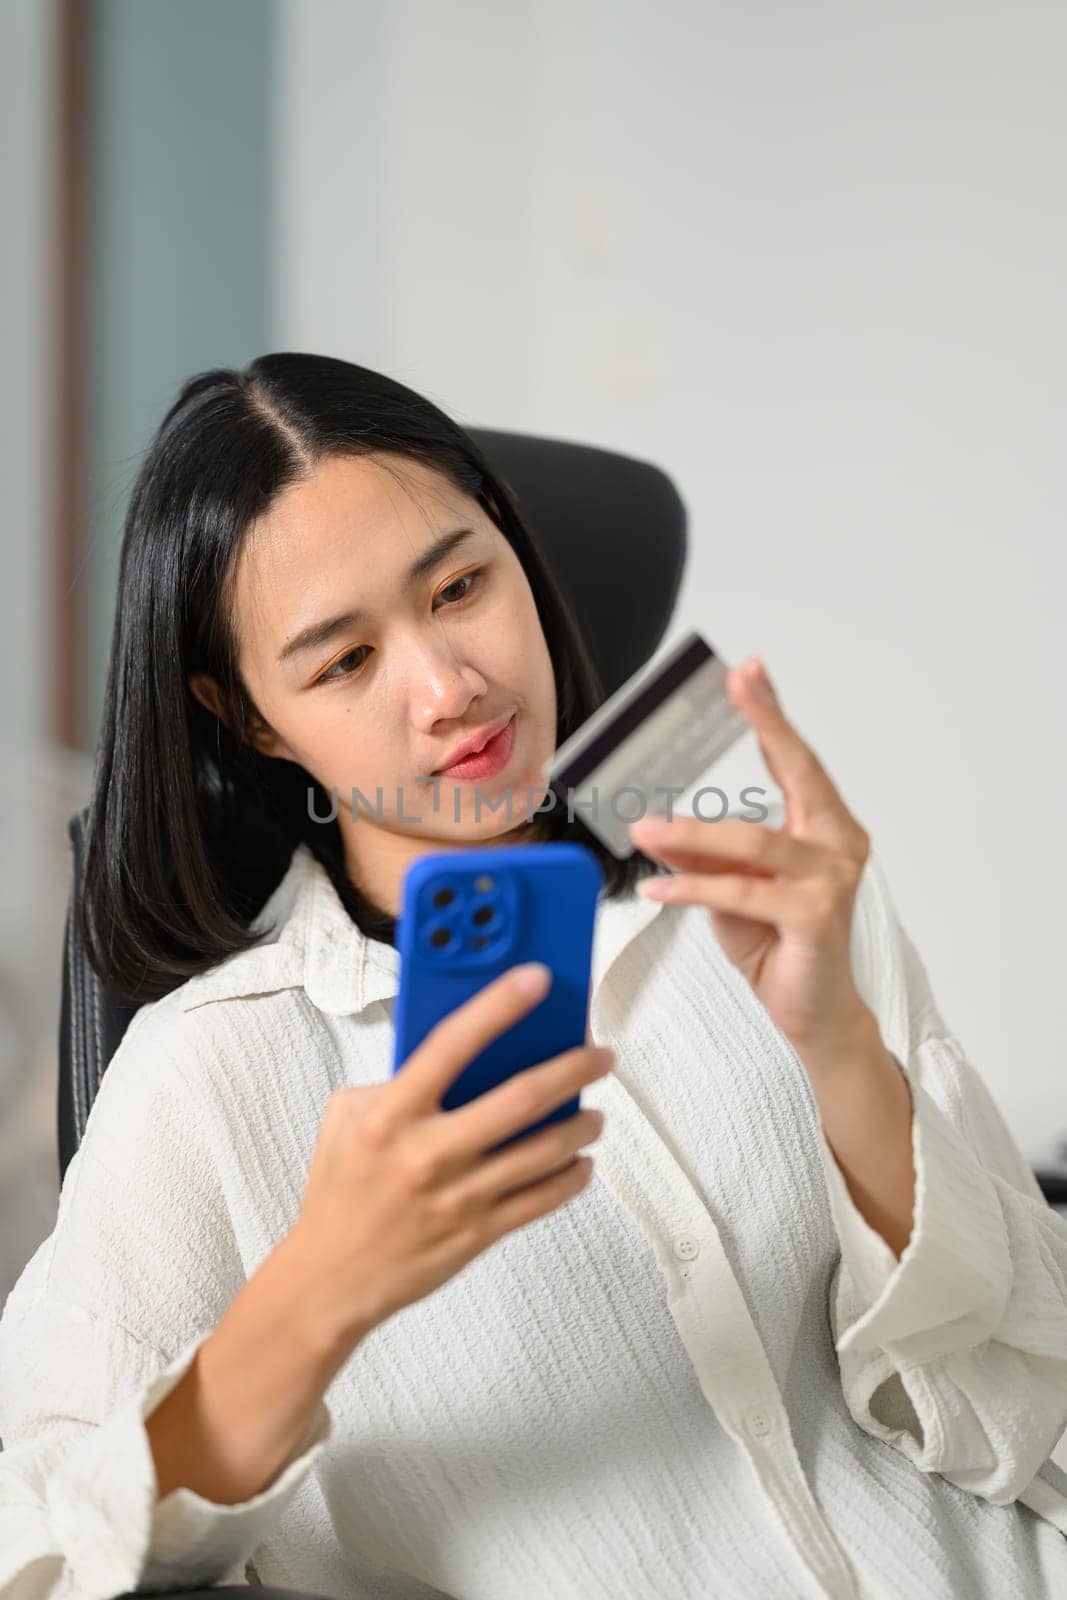 Portrait of pretty young woman holding credit card making payment on smartphone.